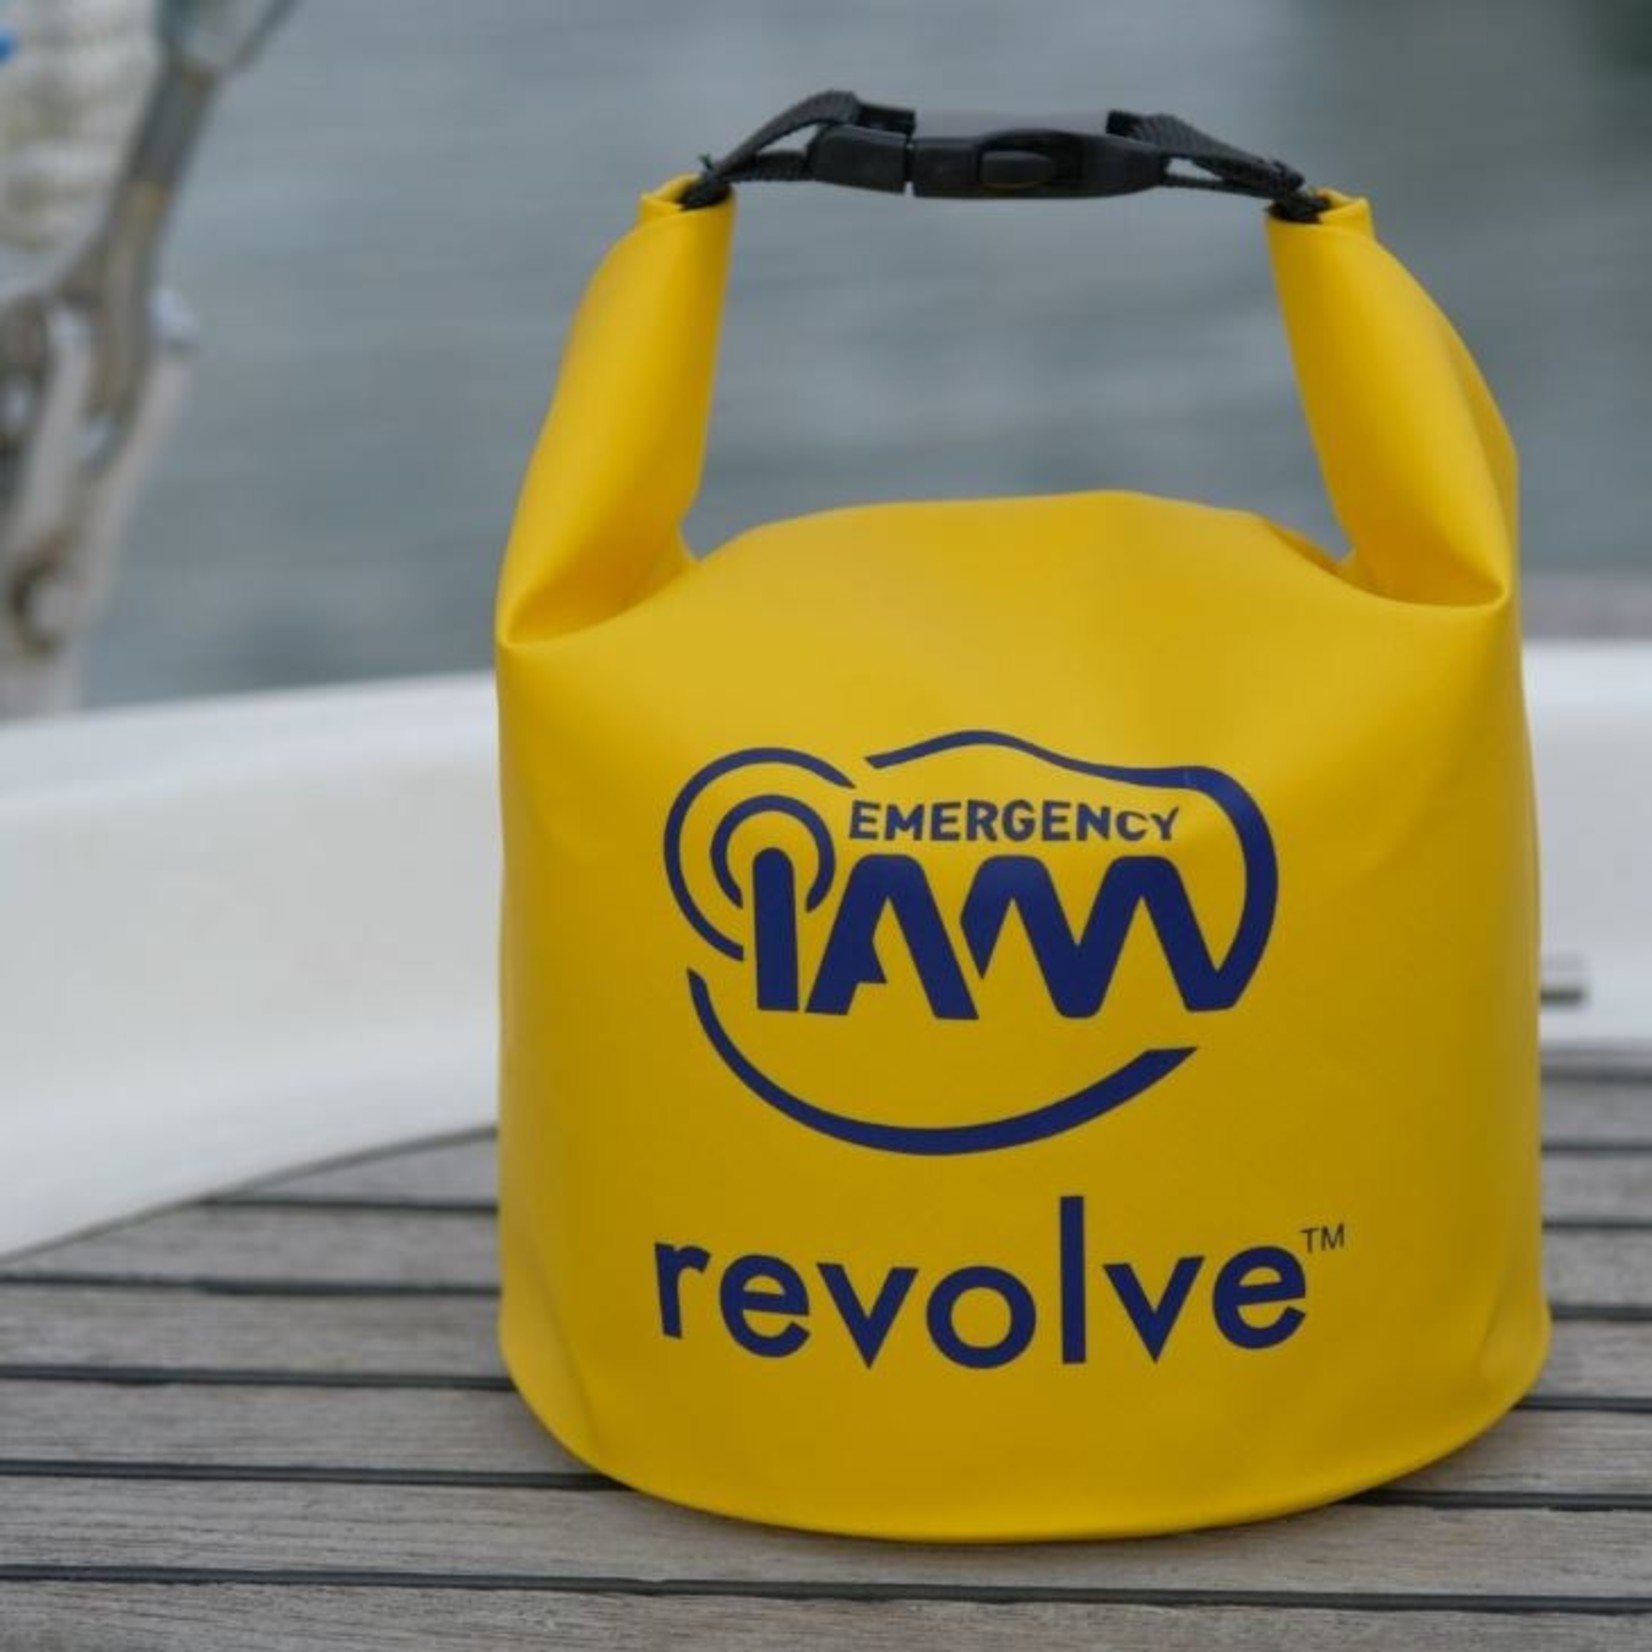 Revolve Waterproof storage bag for the emergency antenna